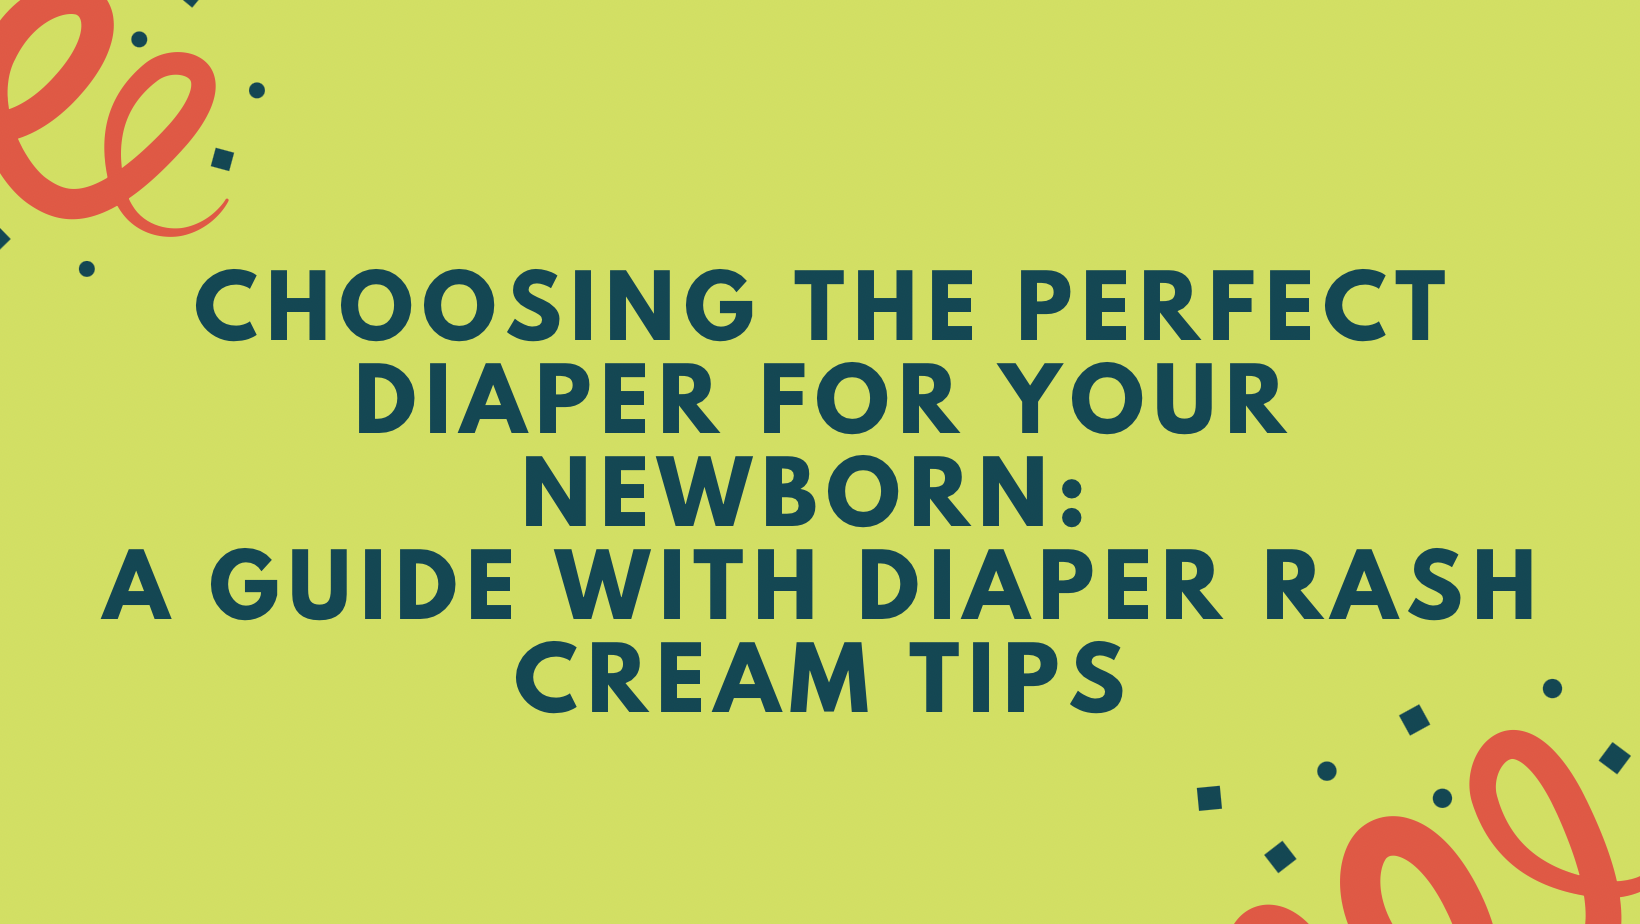 Choosing the Perfect Diaper for Your Newborn: A Guide with Diaper Rash Cream Tips